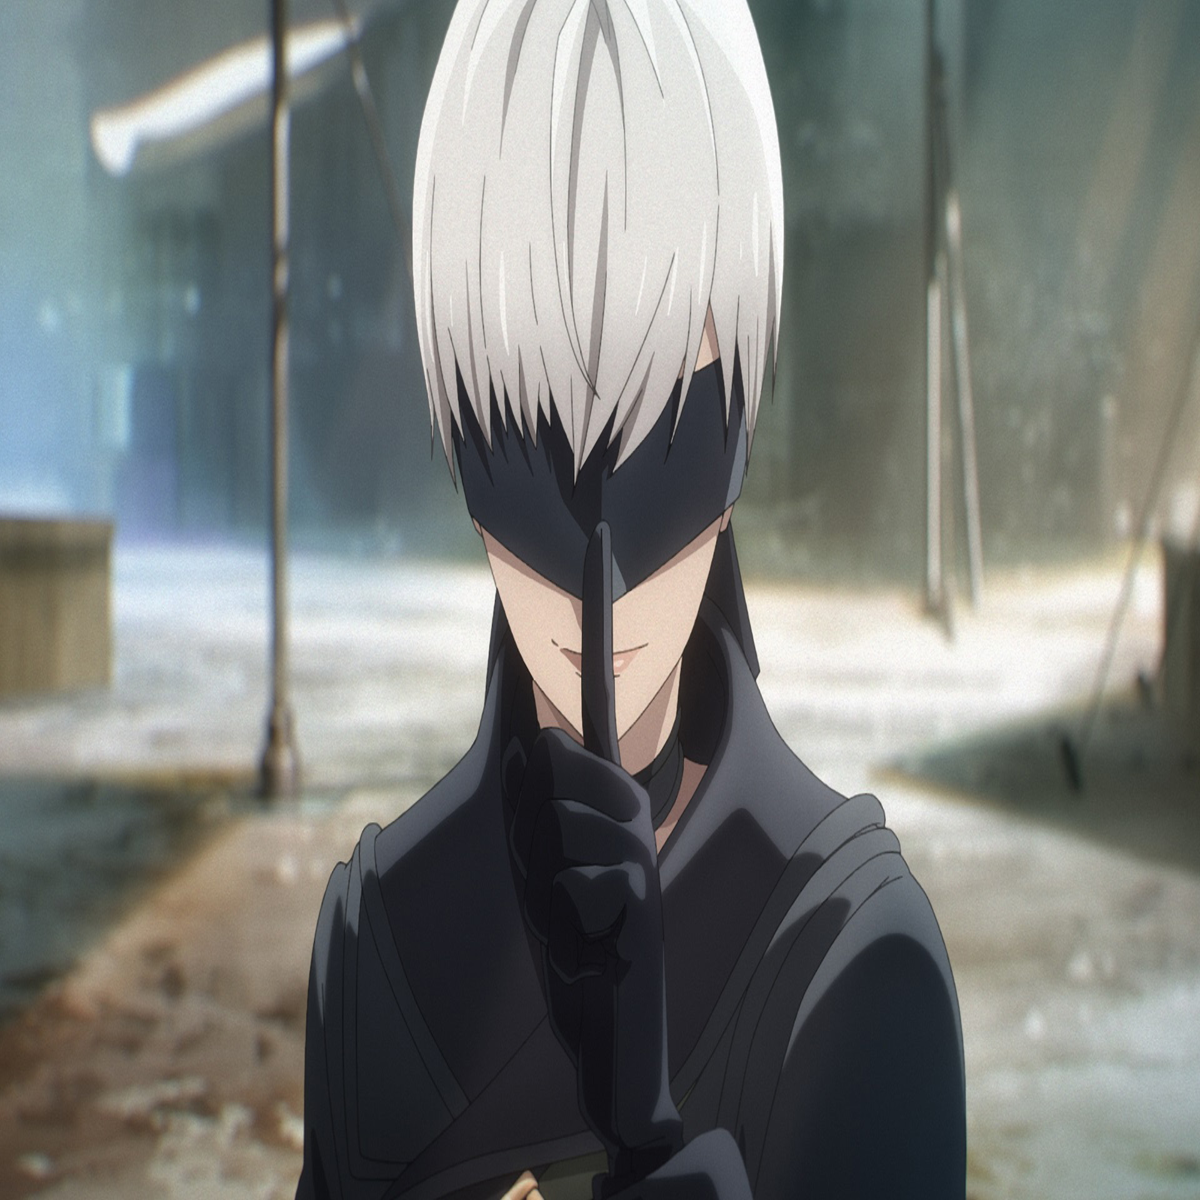 NieR: Automata Ver1.1a' is already the must-watch anime of the season